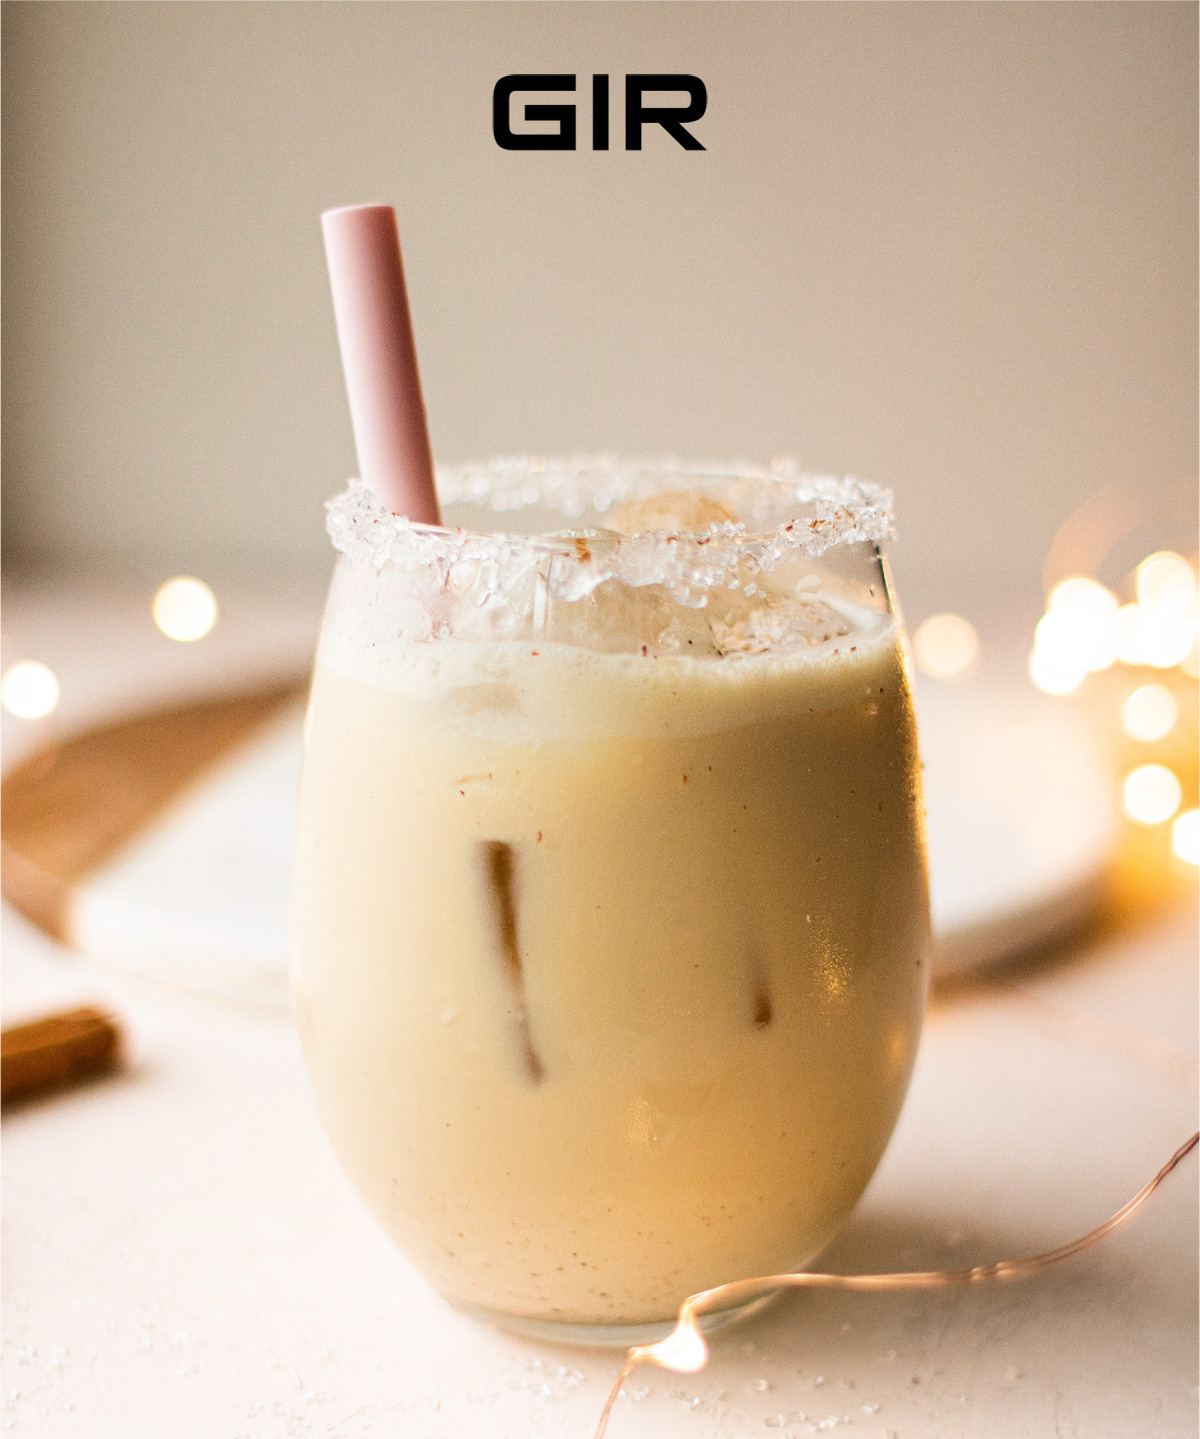 GIR: Get It Right

                                Drinks all around 
                                Something for Santa to sip on
                                Celebrate with a drink good enough for the Santa man himself. Knock back one of these Tipsy Santa cocktails or keep it warm and cozy with extra special hot chocolate.
                                Don't forget to include a colorful glow straw for a festive, light-filled drink that will warm your heart and flush your cheeks. Let's get to it!

                                Get Party Straws
                                